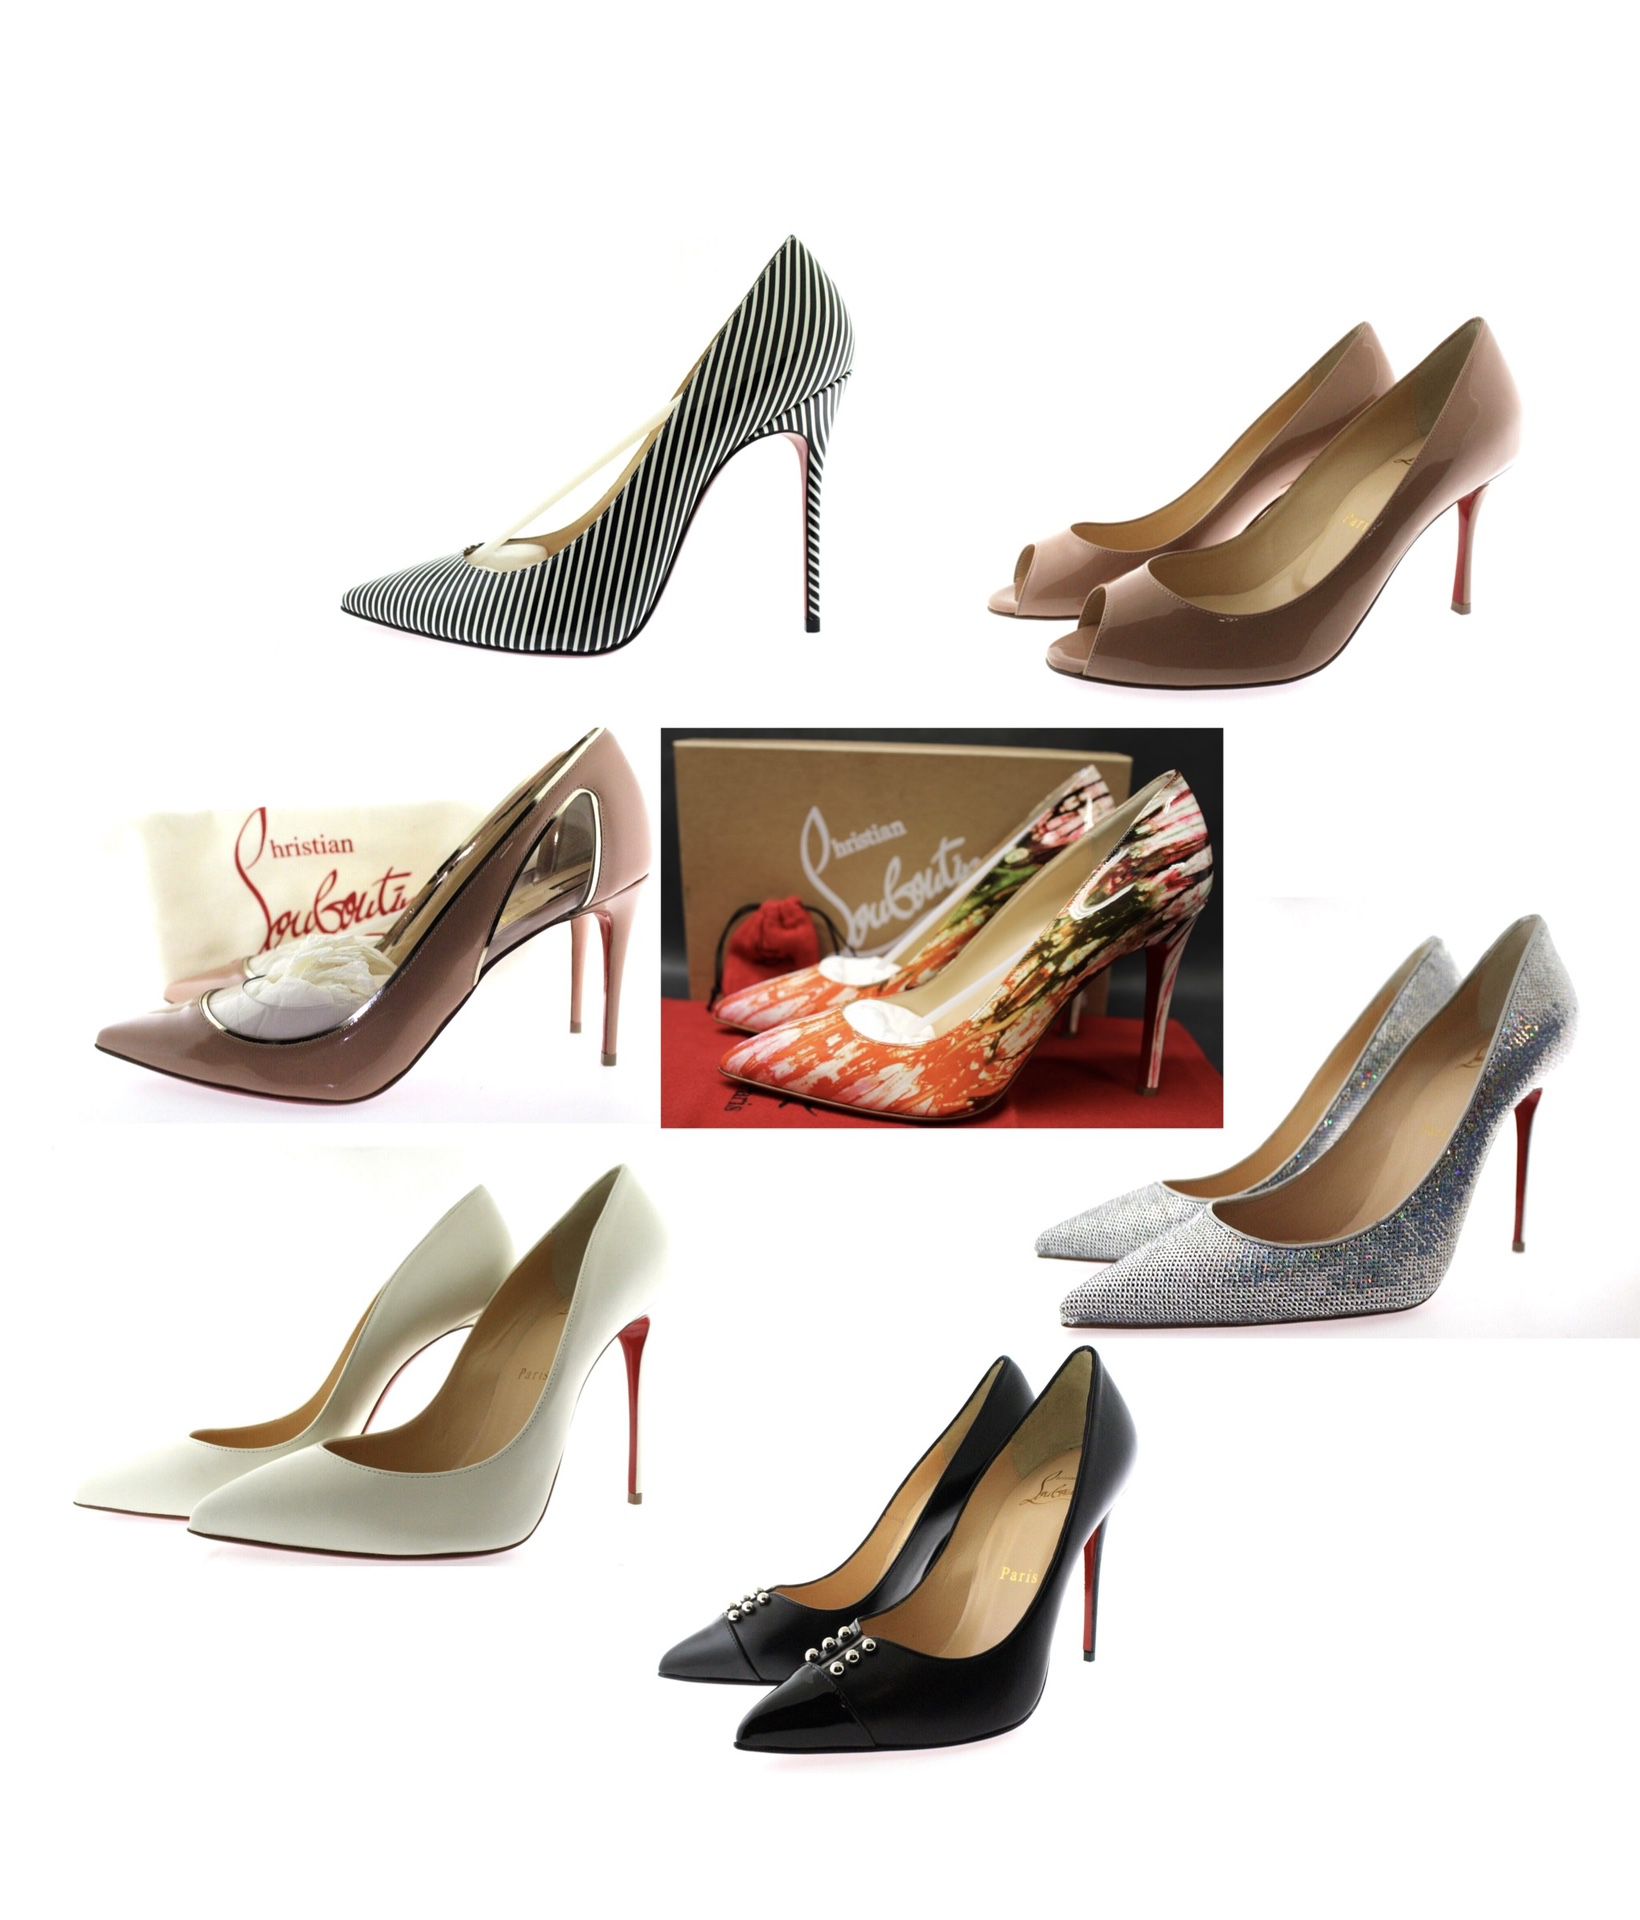 NEW Christian Louboutin women’s heels - 9 US, 6 US - white black glitter silver open toe leather nude pump - PRICE FOR EACH - LOOK DESCRIPTION